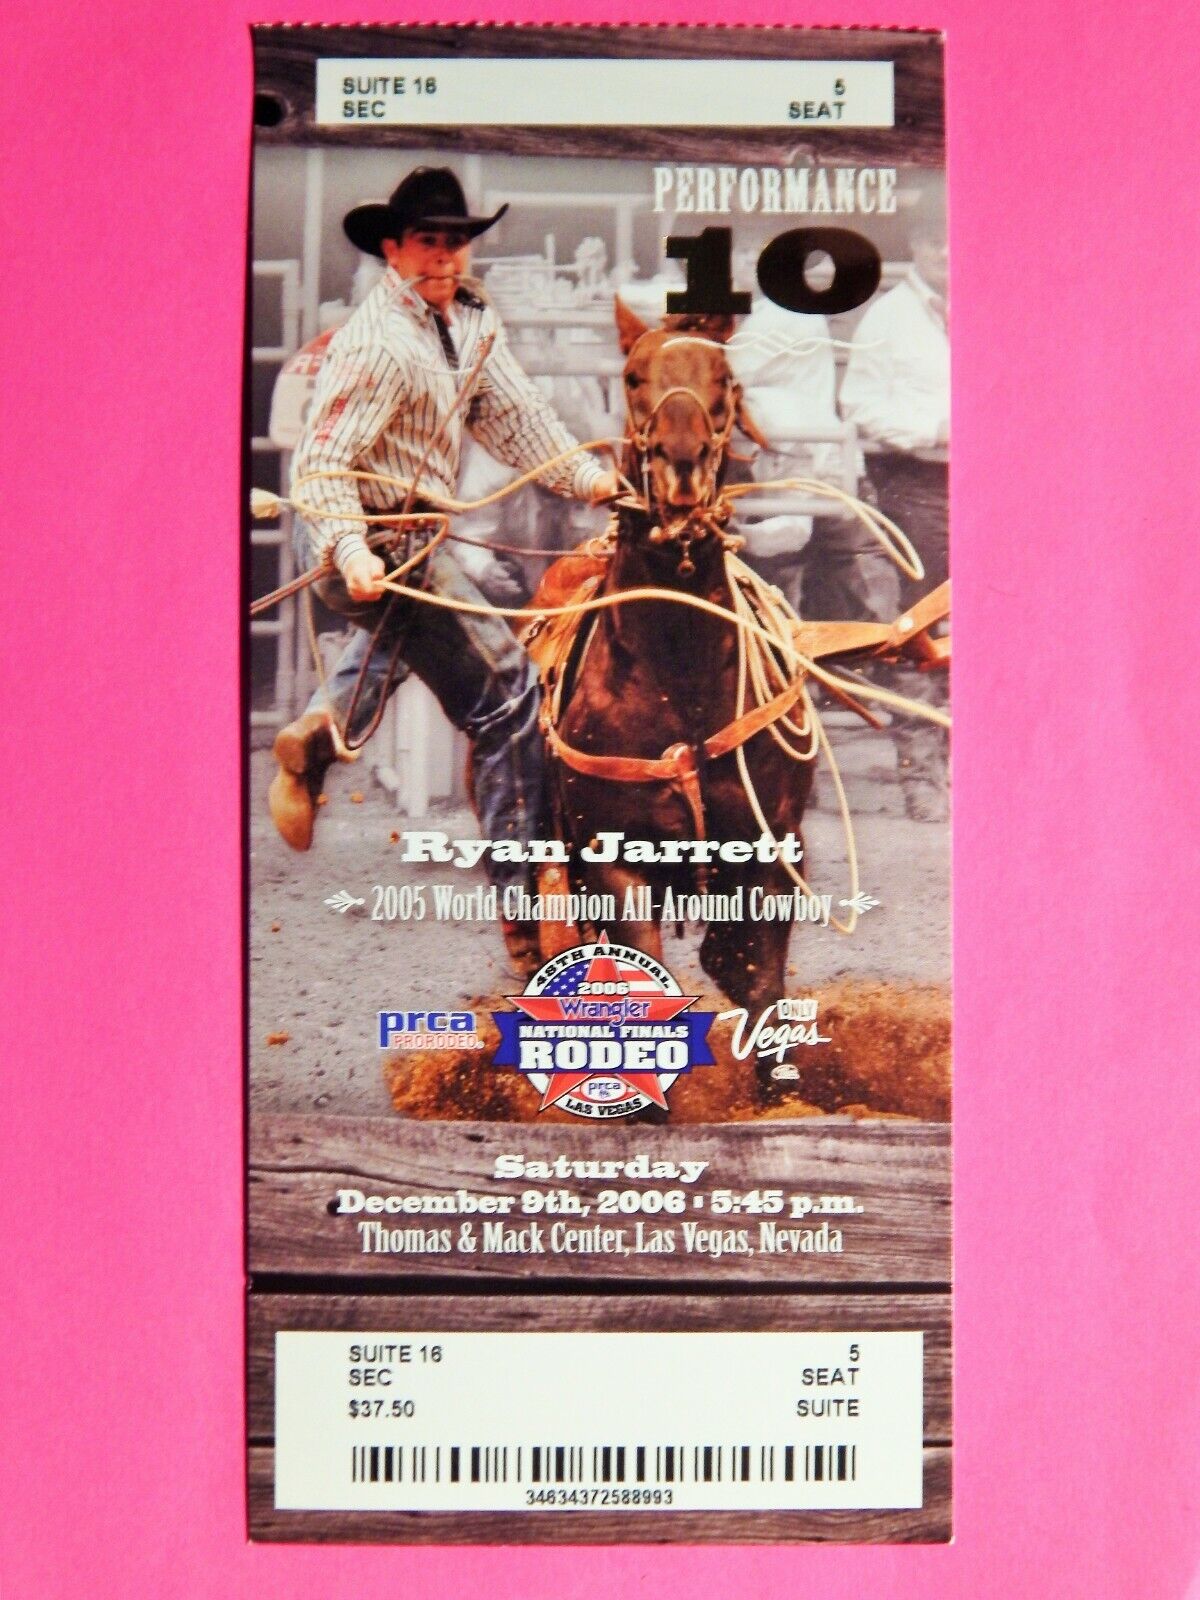 2006 NATIONAL FINALS RODEO LG ORIGINAL USED TICKET RYAN JARRETT COLOR Photo Poster painting